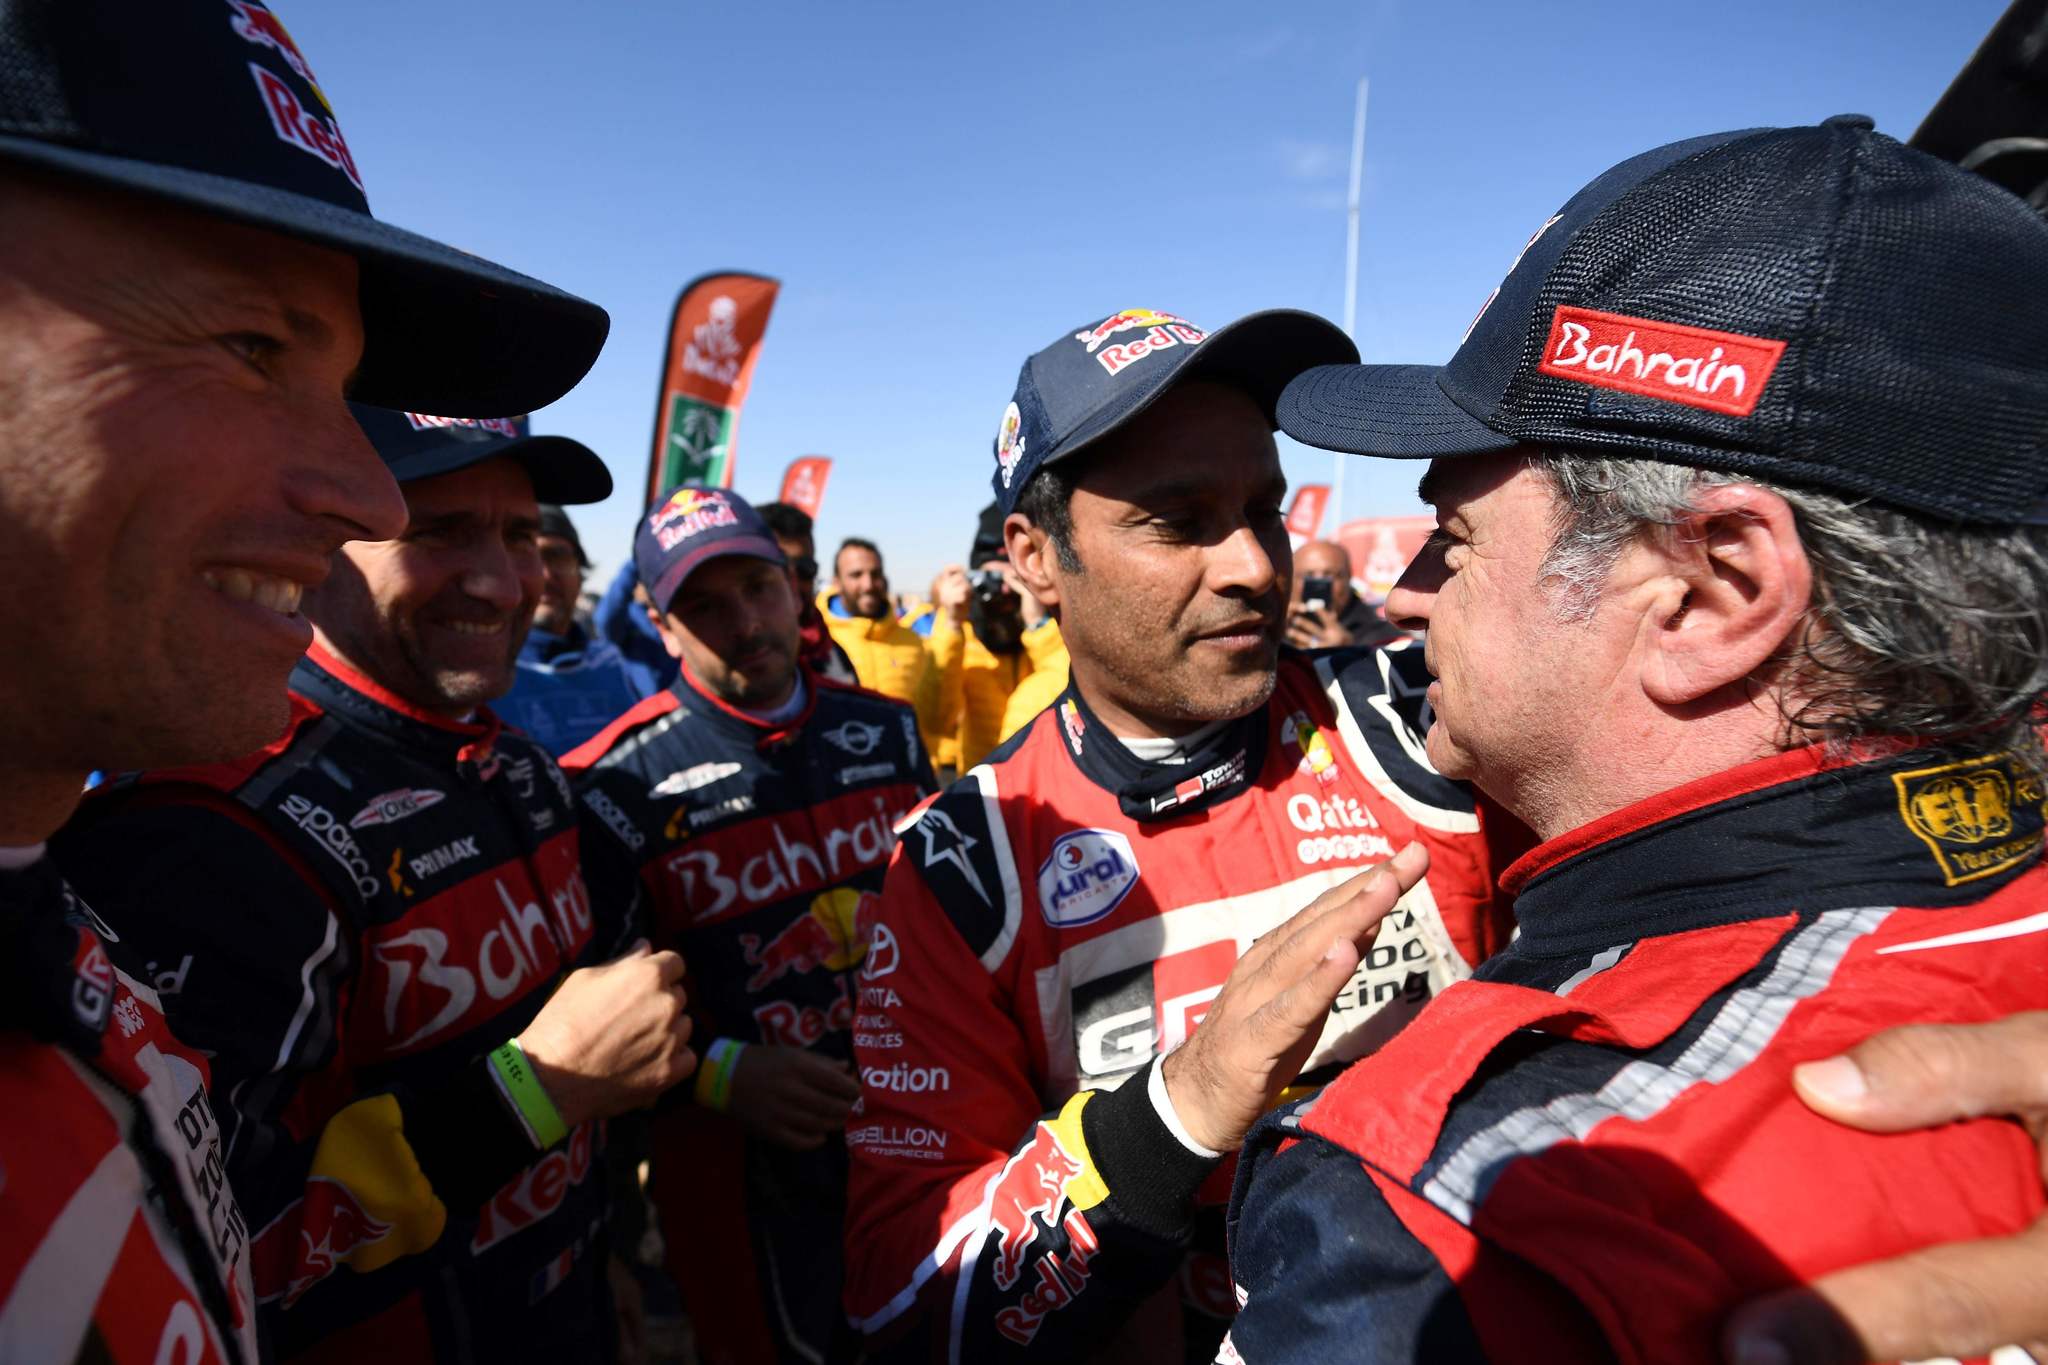 First-placed for the auto category JCW X-RAID Mini Team Spains driver Carlos <HIT>Sainz</HIT> (R), is congratulated by second-placed Toyotas team Qatars driver Nasser Al-Attiyah (C) on the finish area in Qiddiya at the end of the stage 12 of the Dakar 2020 between Haradh and Qiddiya, Saudi Arabia, on January 17, 2020. (Photo by FRANCK FIFE / AFP)